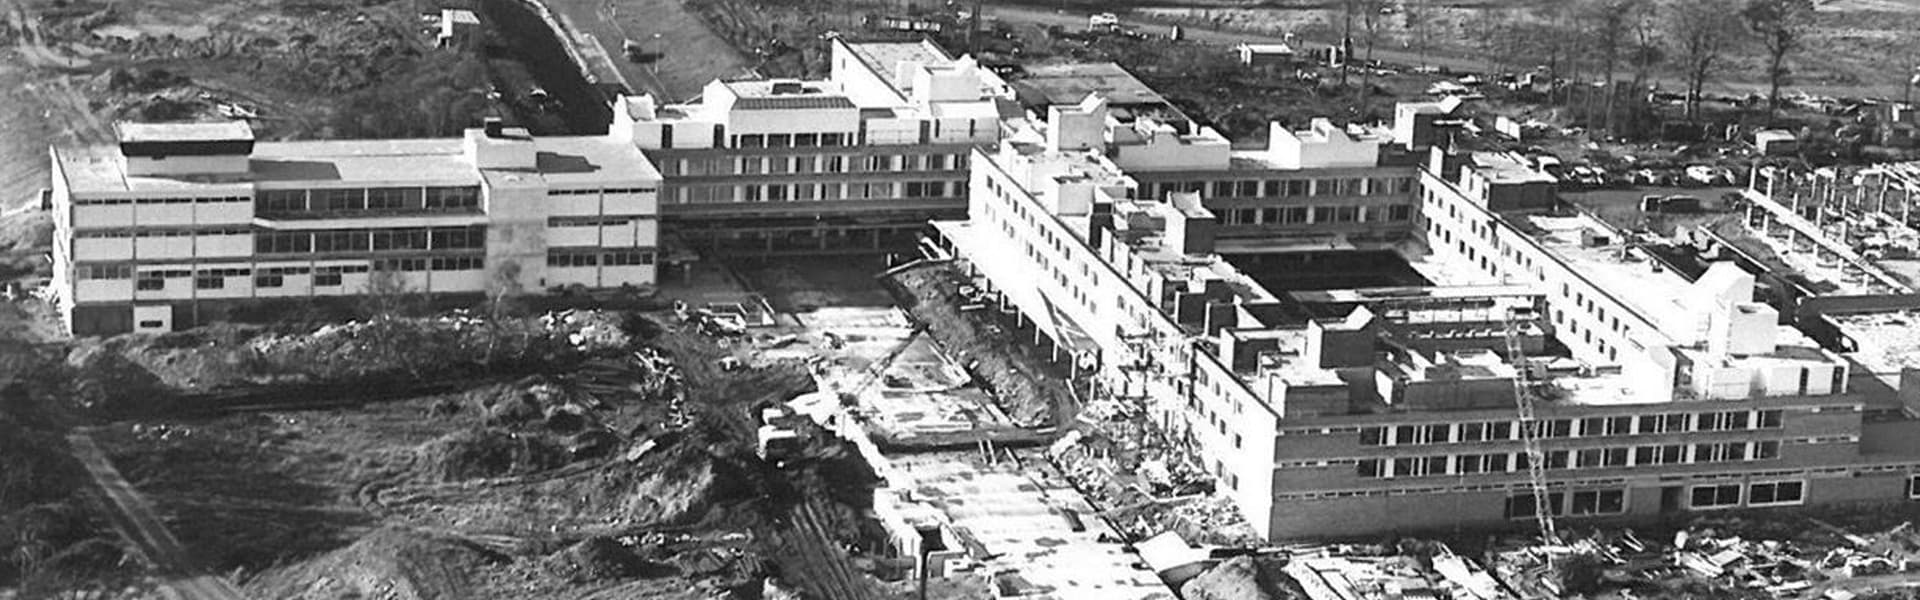 An aerial photo showing the University under construction in the 1960s.